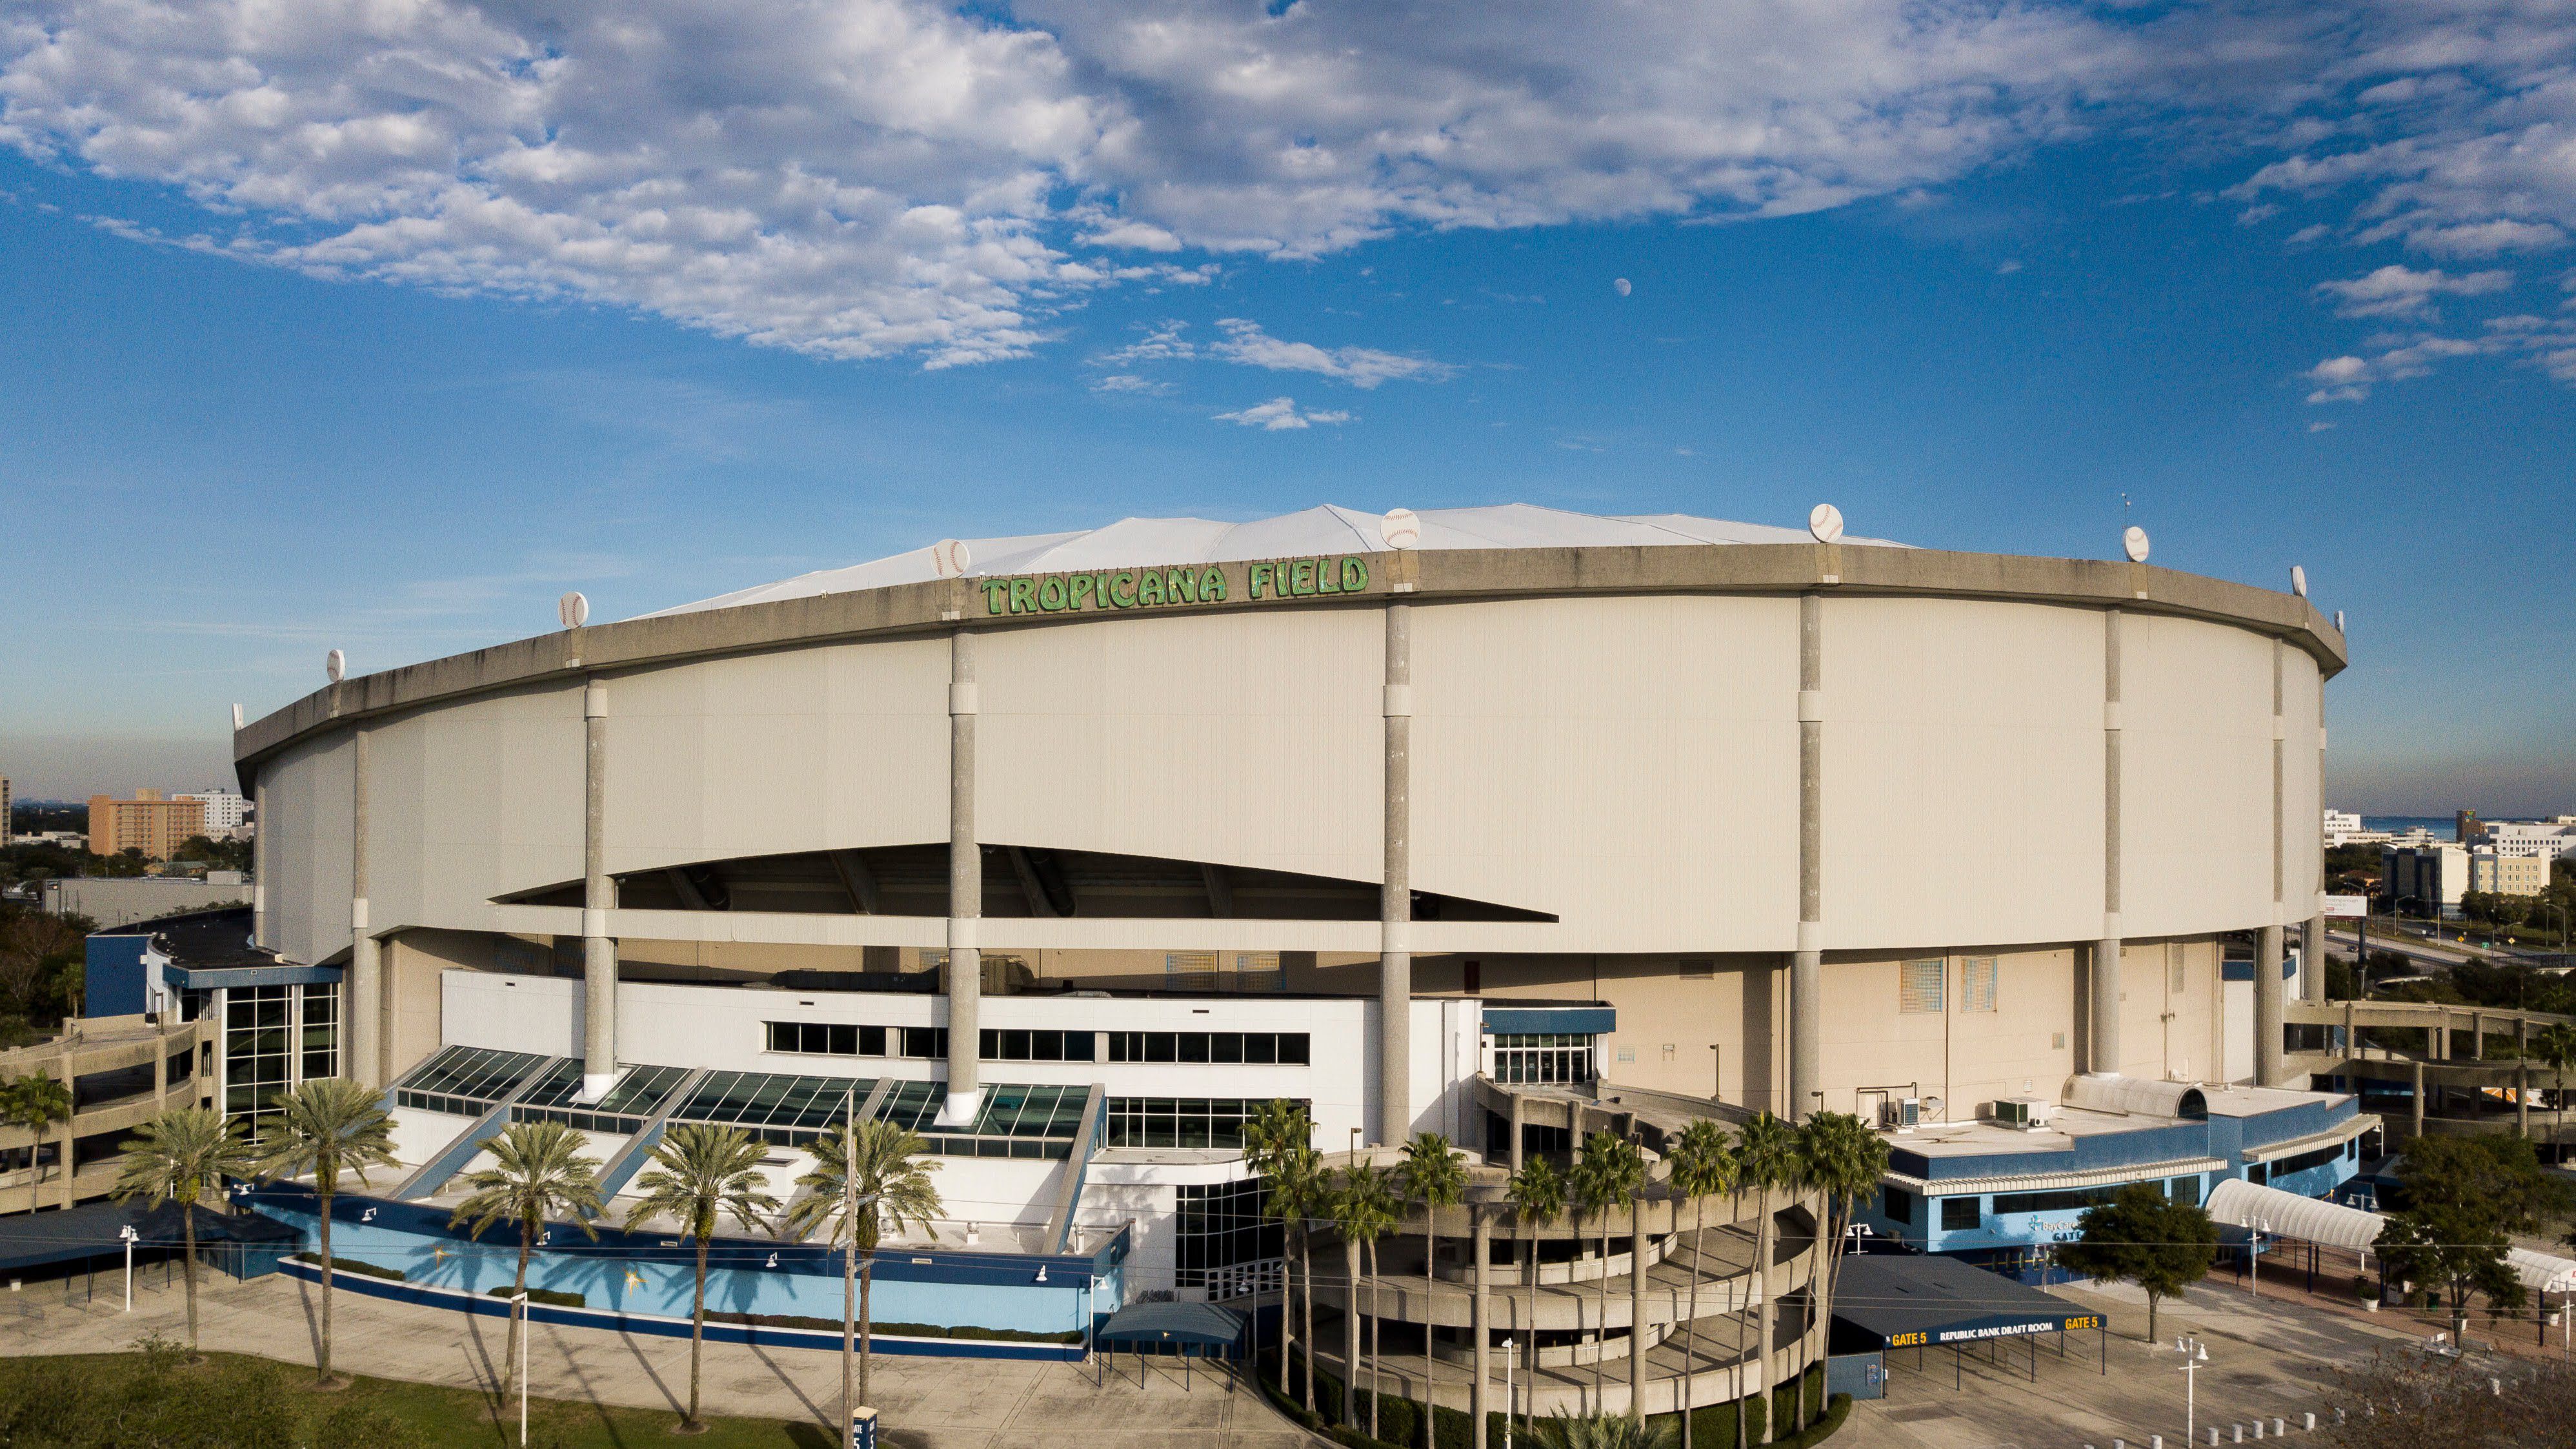 Tampa Bay Rays signs outside Tropicana Field Stadium in St